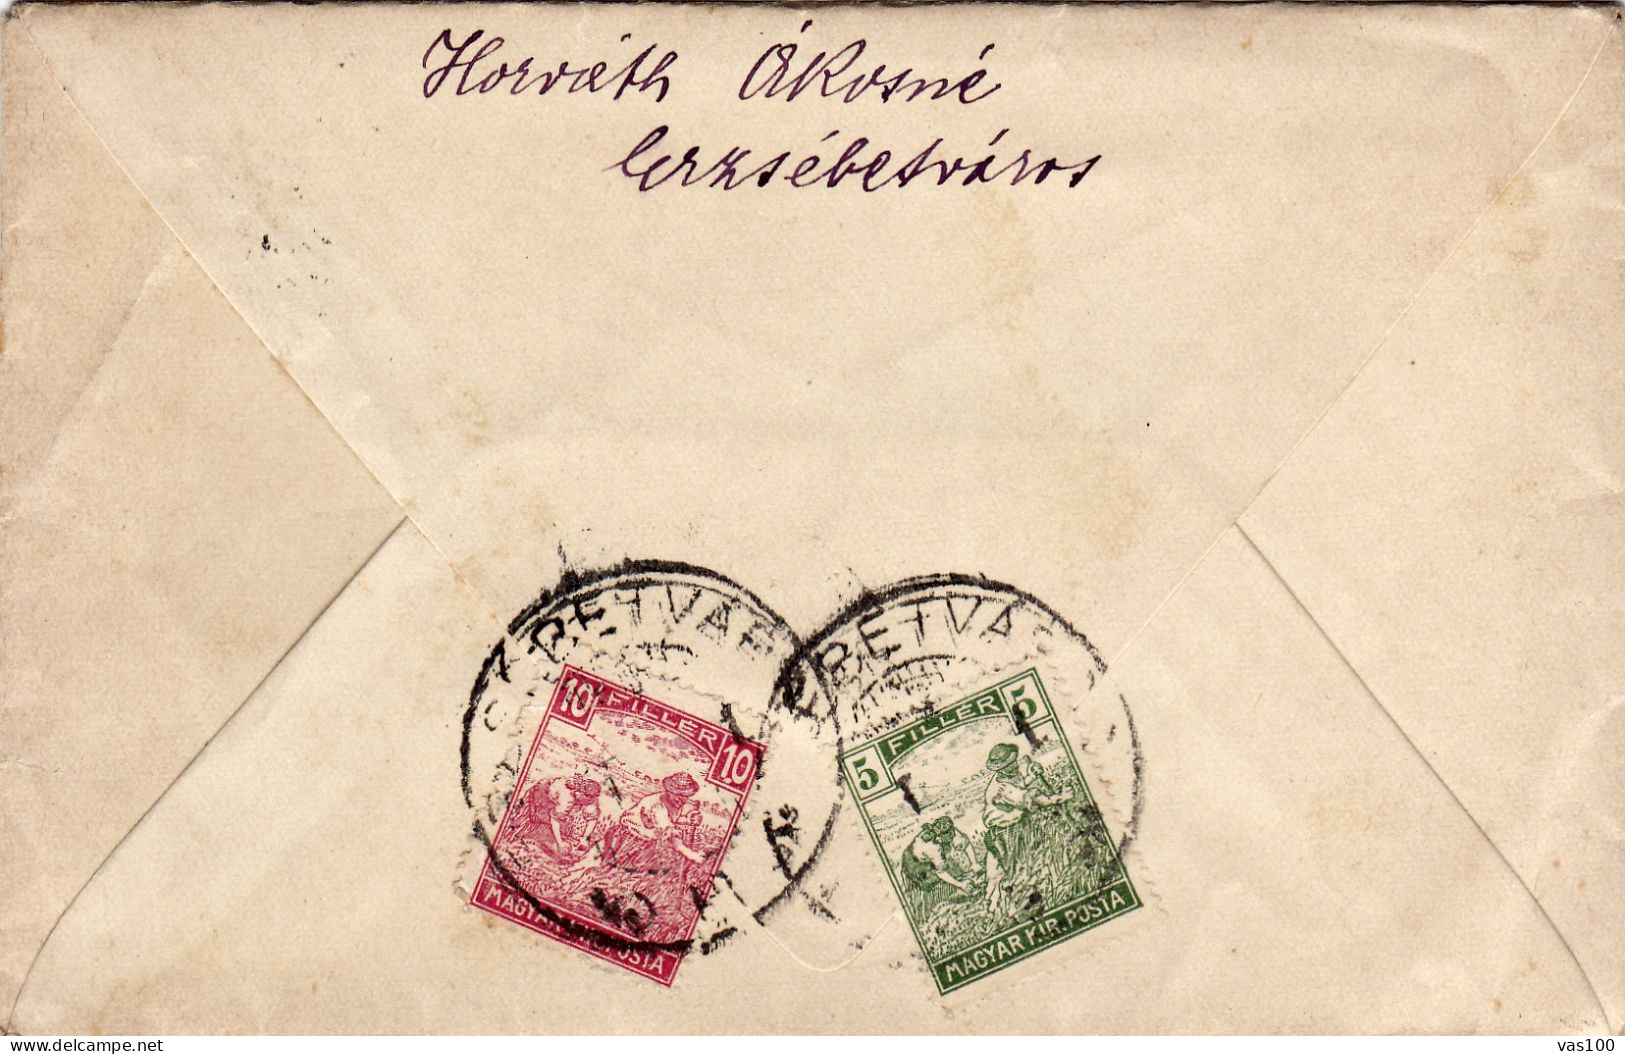 GRAINS HARVESTERS STAMPS ON  COVER /5  AND 10 FILER 1917,HUNGARY - Covers & Documents